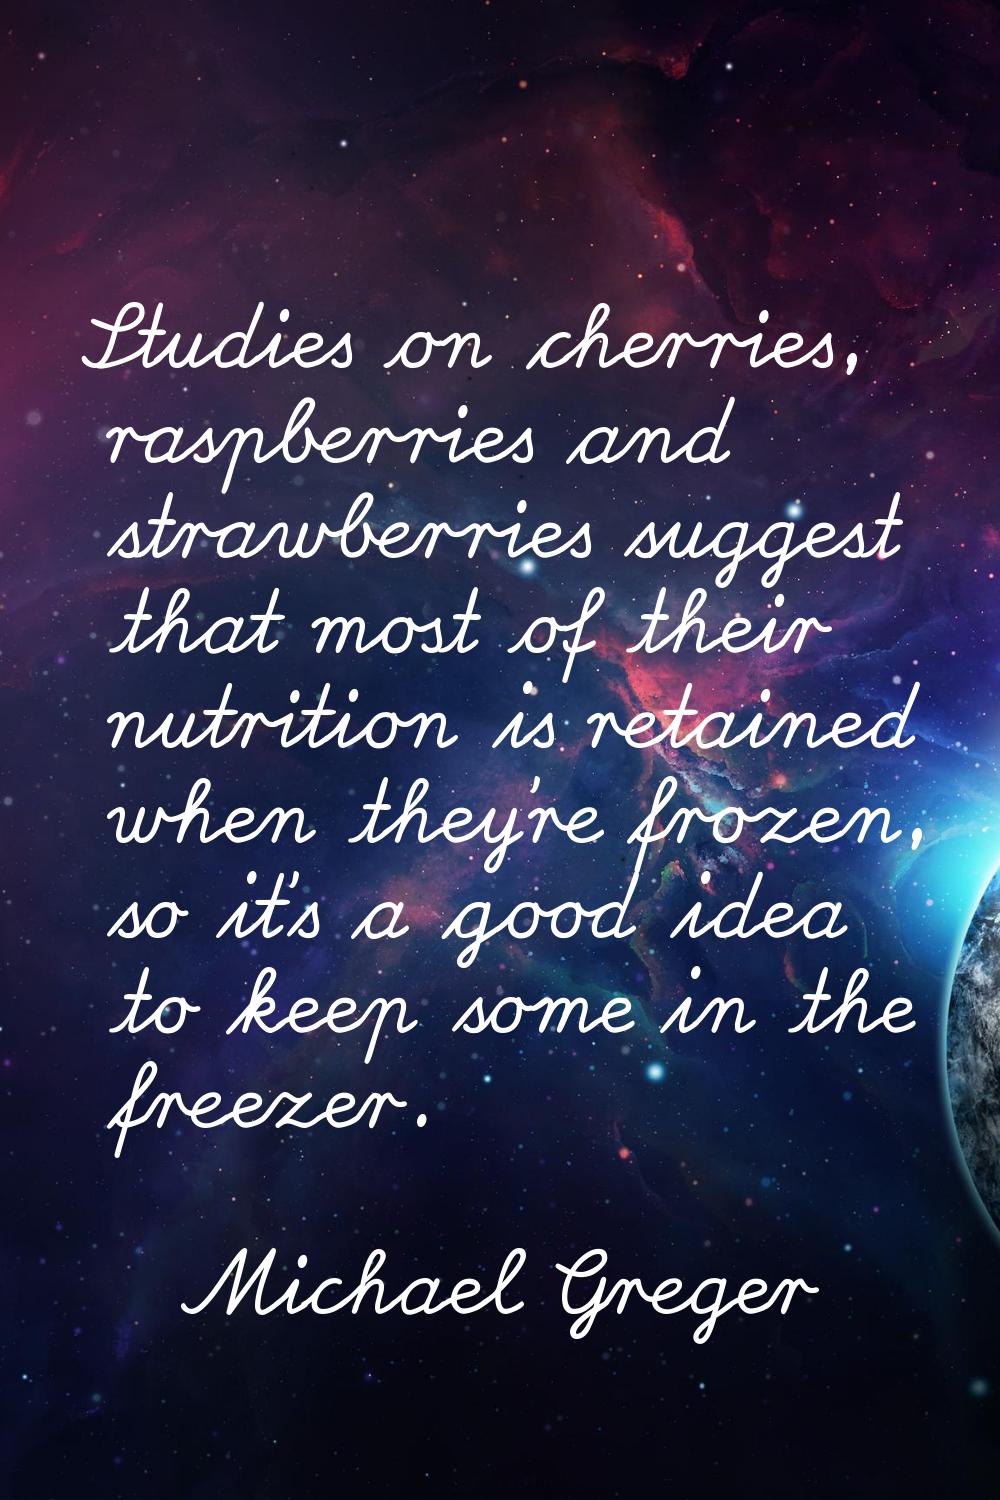 Studies on cherries, raspberries and strawberries suggest that most of their nutrition is retained 